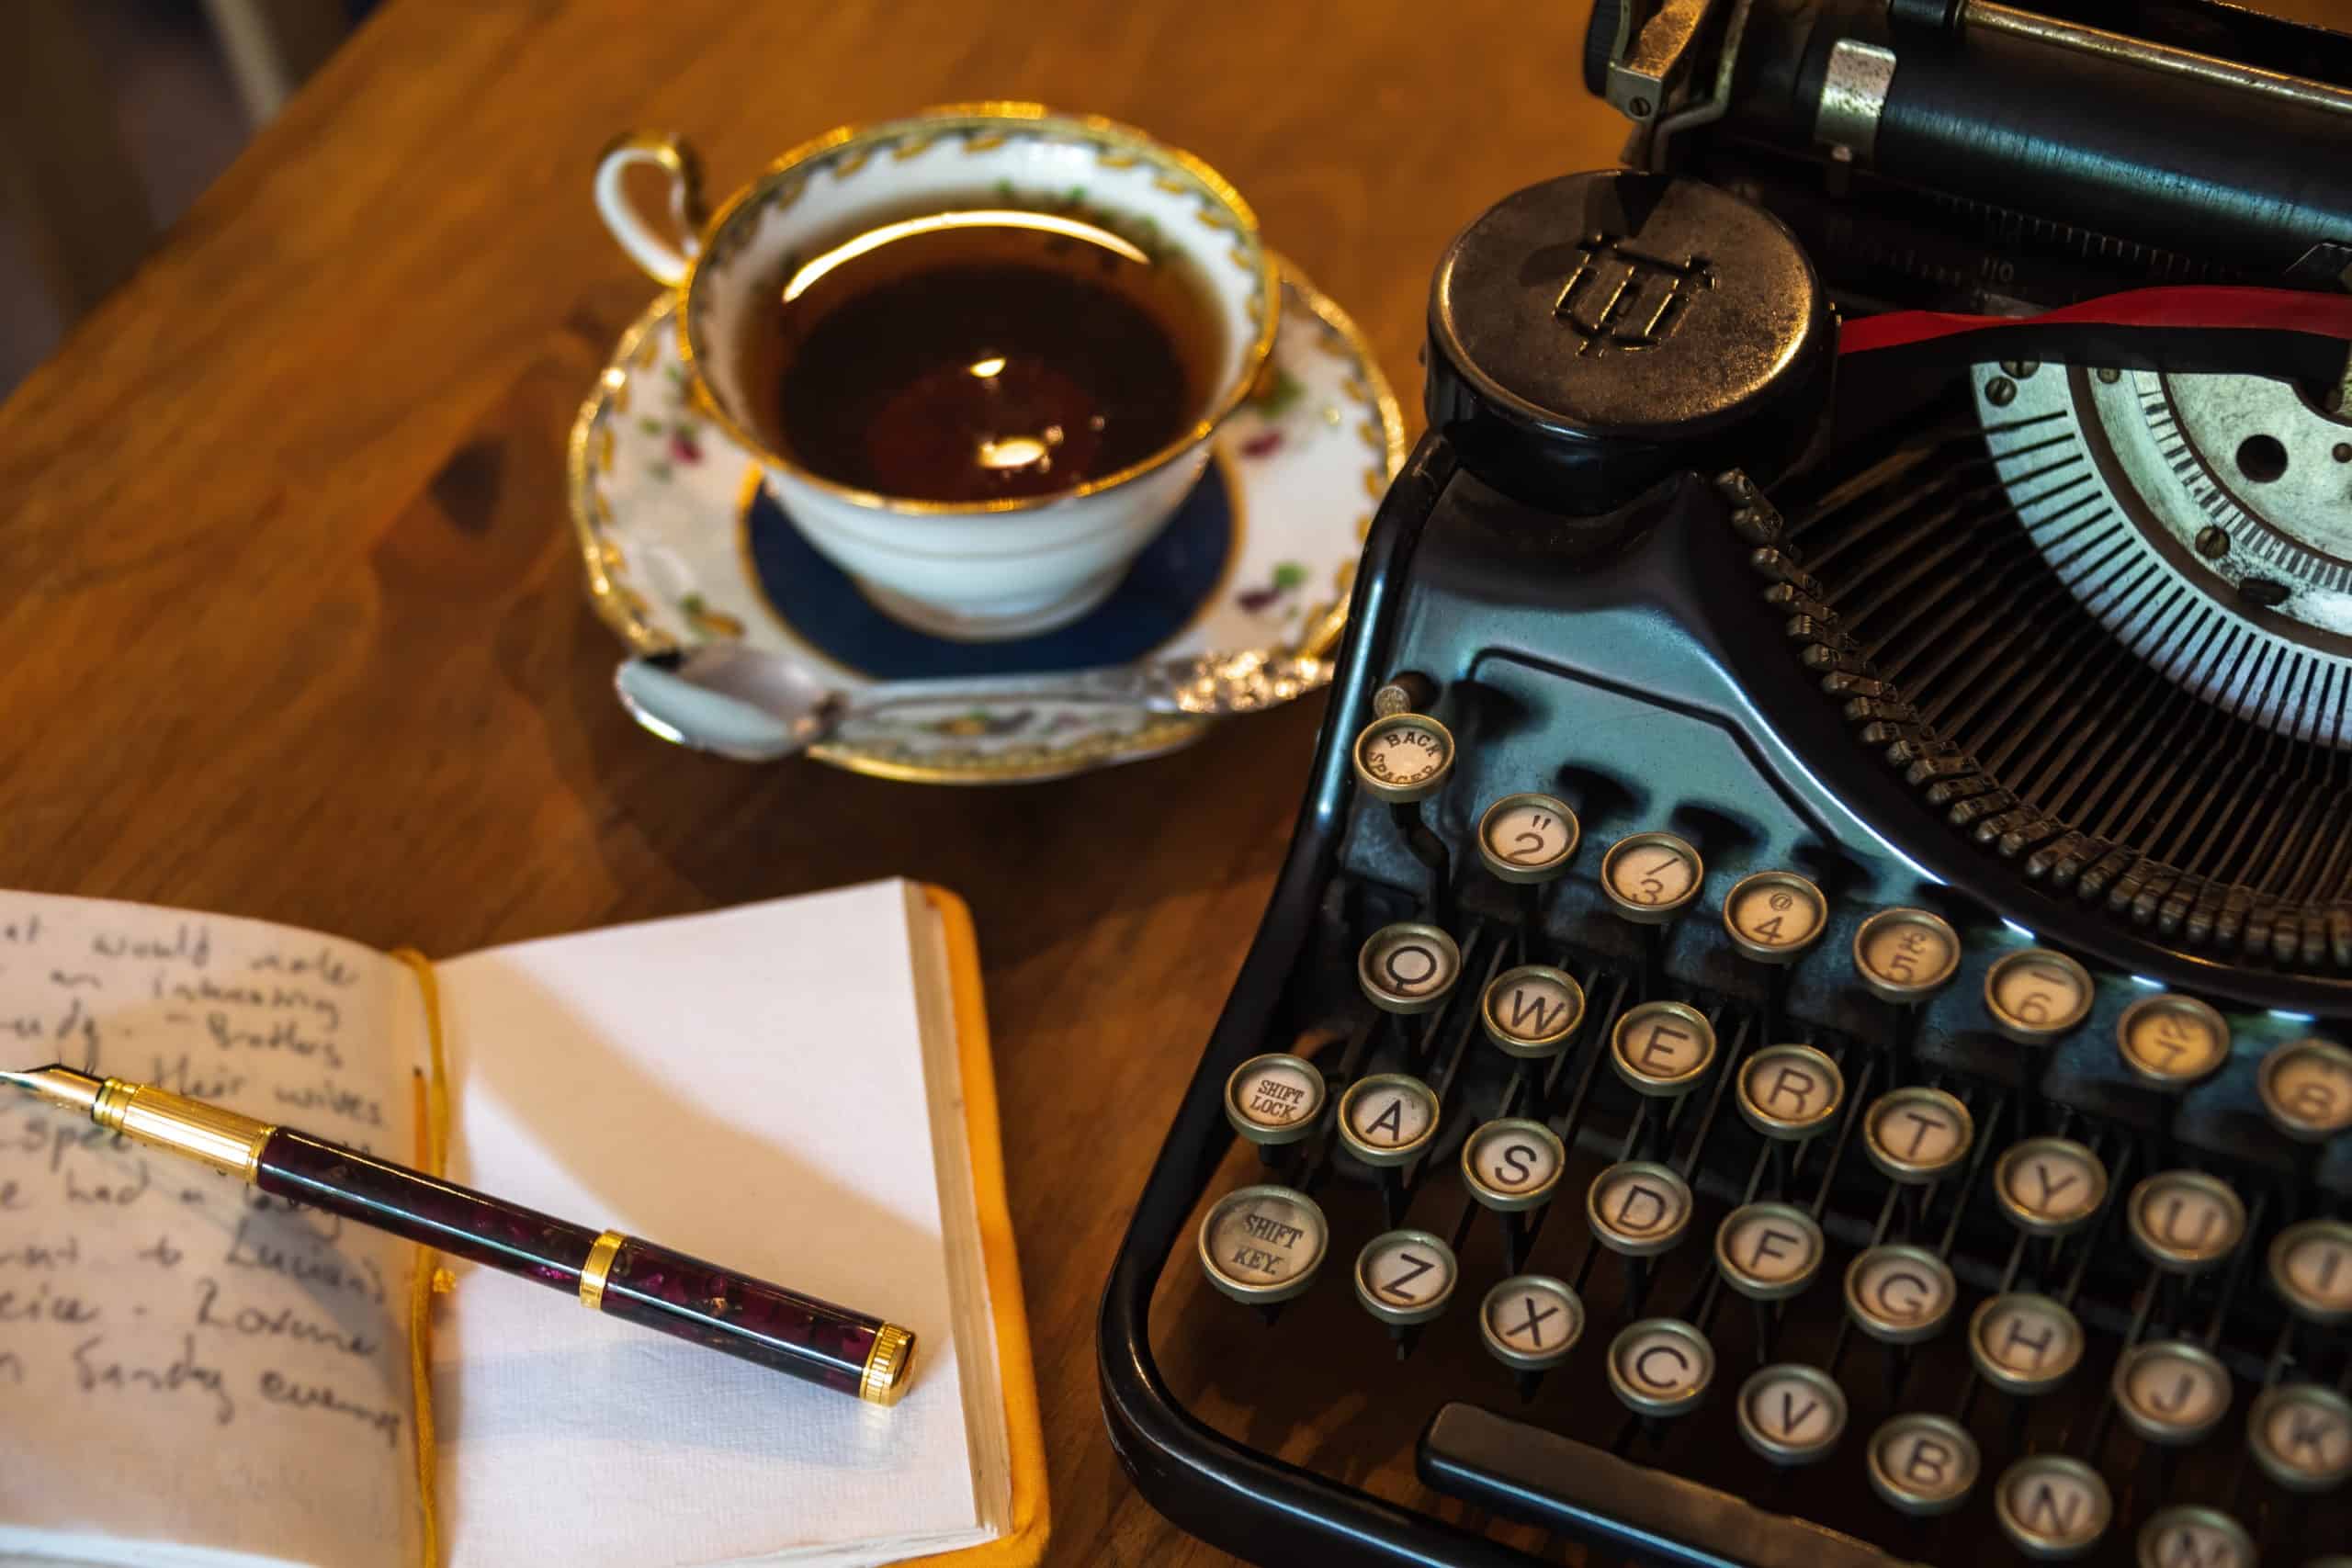 Vintage typewriter, a cup of tea, an open notebook, and pen.